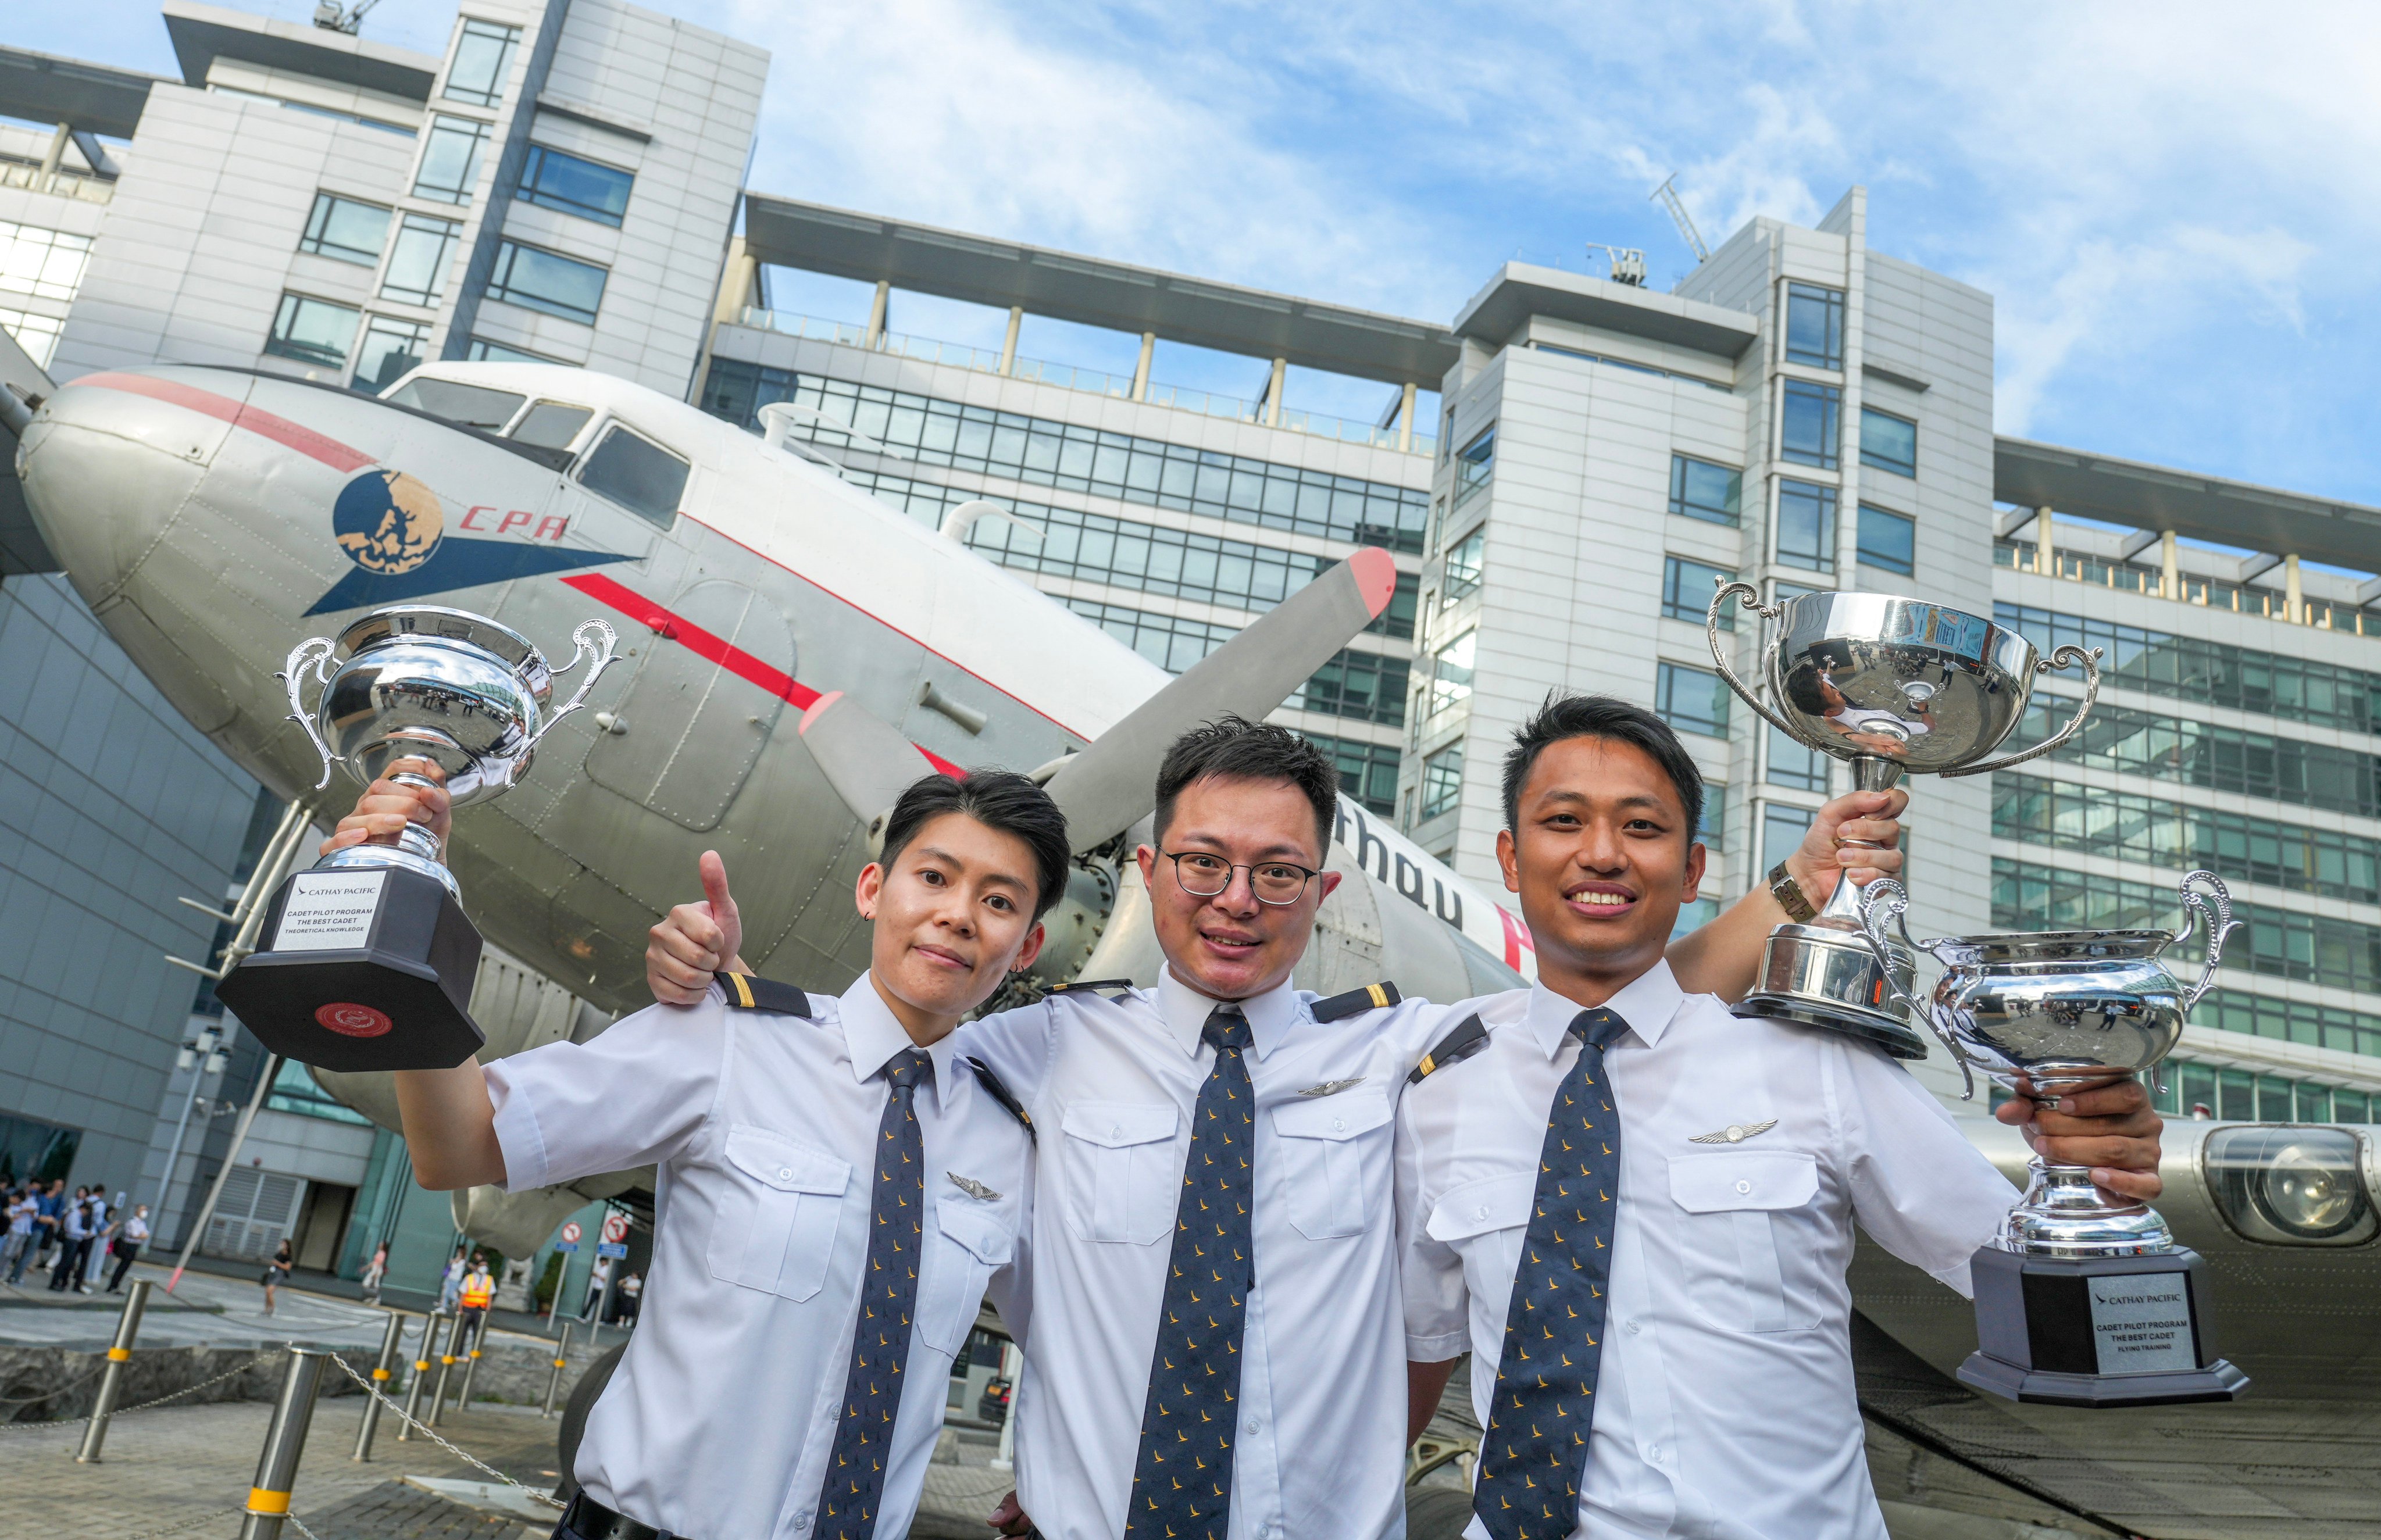 (From left) Trainee Cathay pilots Annie Chan, best theoretical knowledge trophy winner; Tom Kwan, the best all-round cadet and Desmond Tsui, the top in flying training, after their graduation ceremony. Photo: Sam Tsang